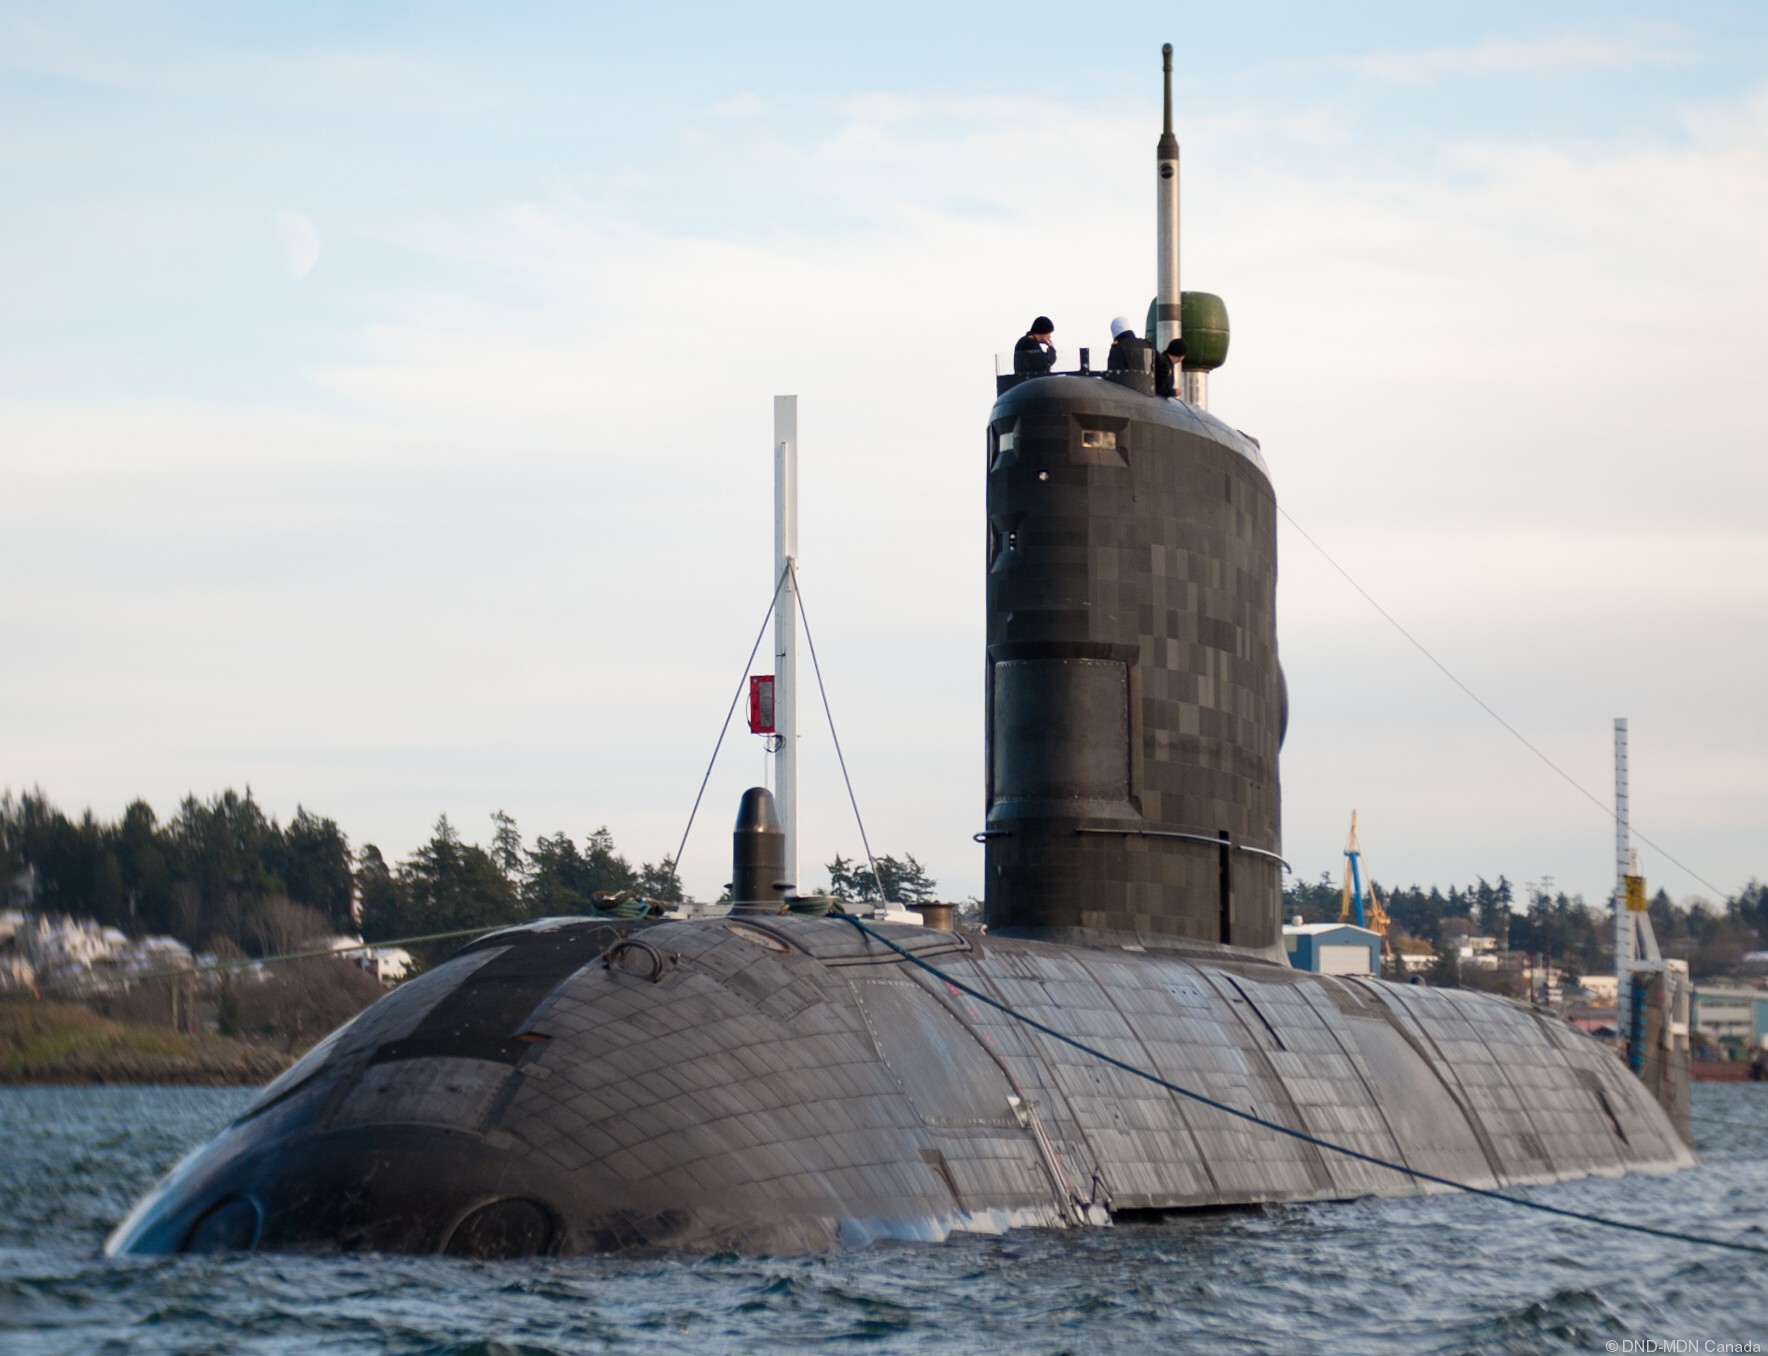 ssk-879 hmcs chicoutimi victoria upholder class patrol submarine ncsm royal canadian navy 18